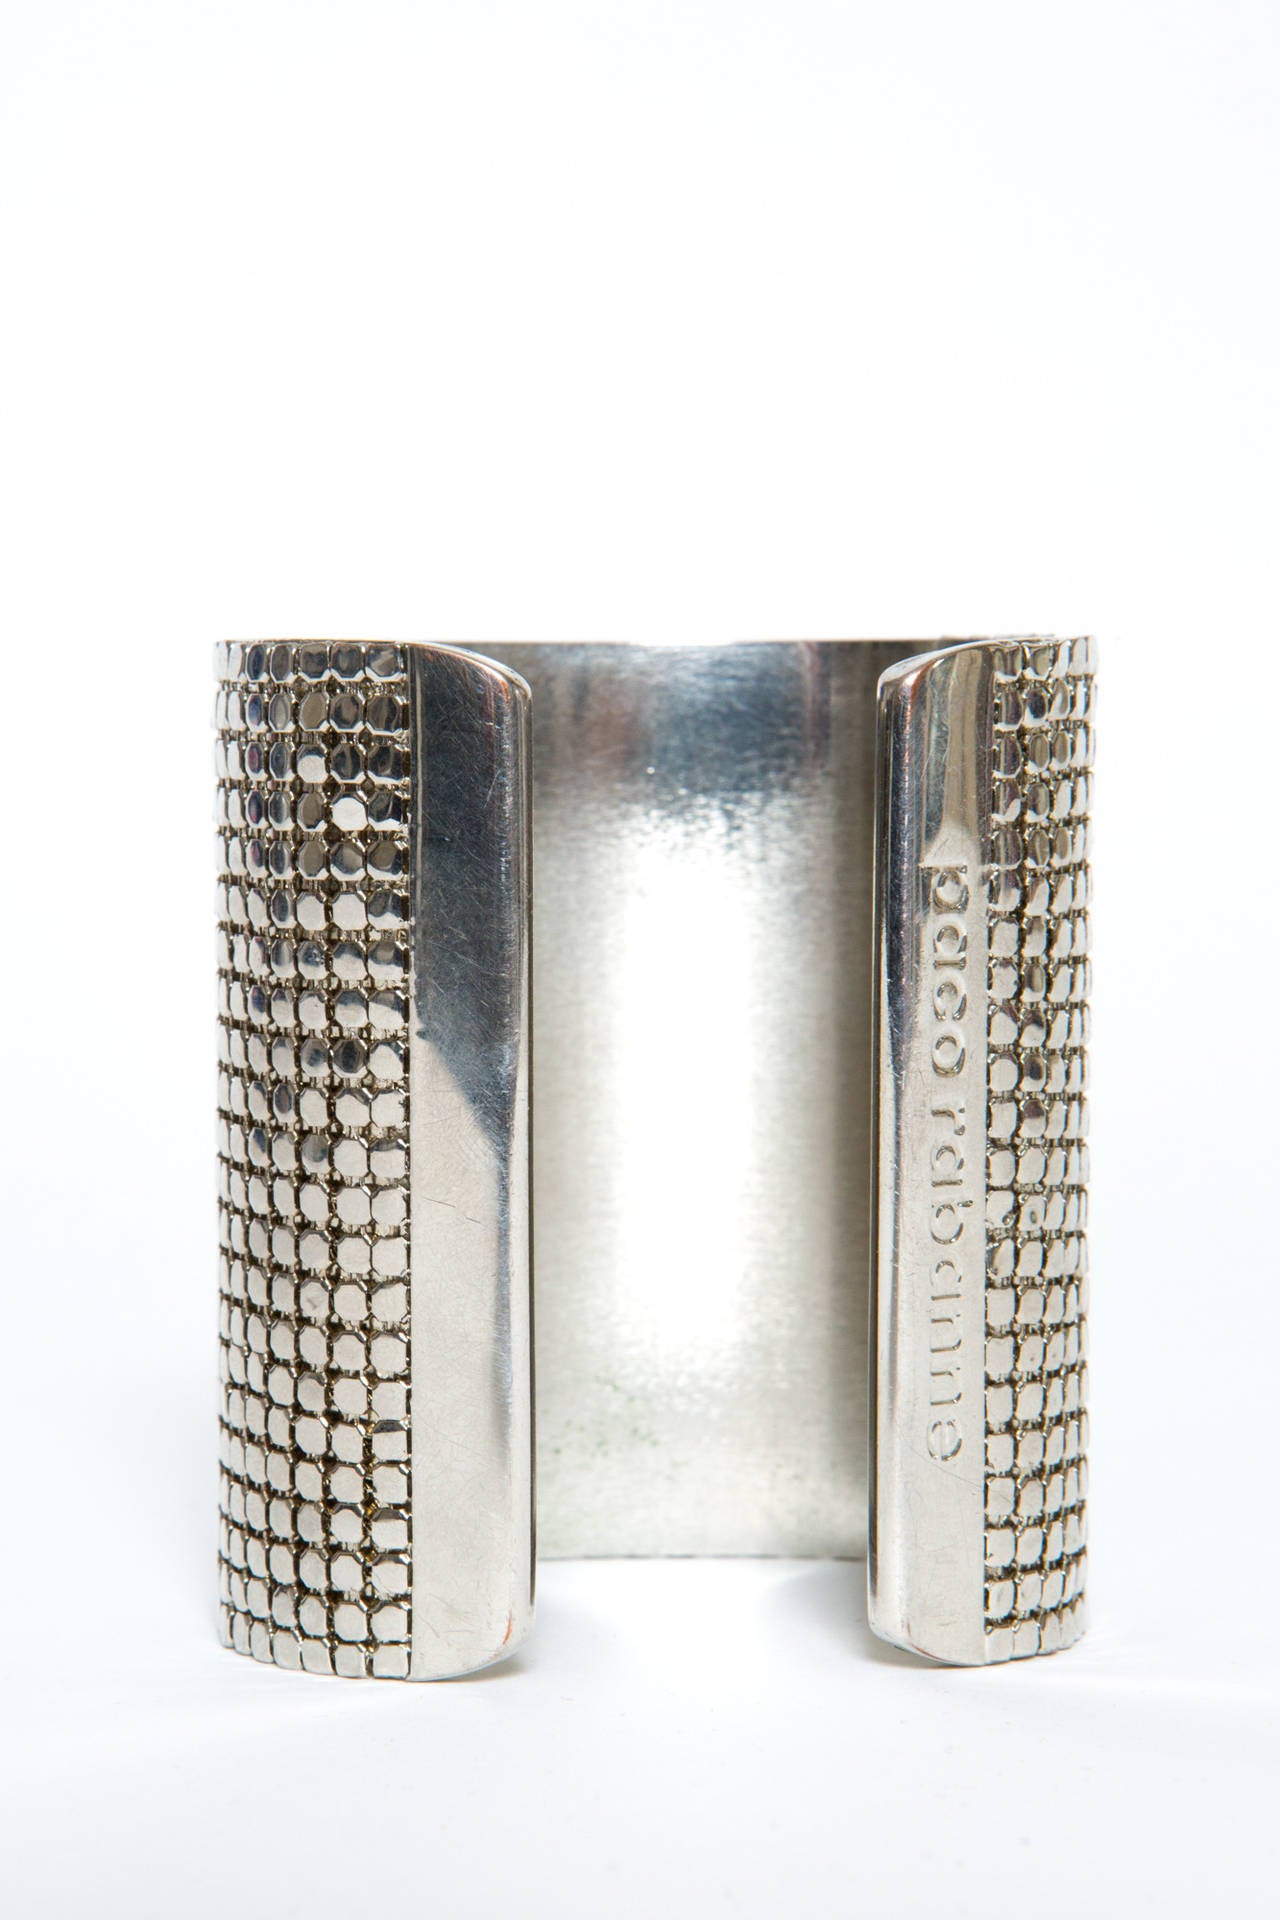 Silver-tone wide 'Disco' bracelet cuff from Paco Rabanne with a chainmail effect design and logo detail.
In excellent vintage condition. Made in France.
We guarantee you will receive this iconic bracelet as described and showed on photos.
2,7in X